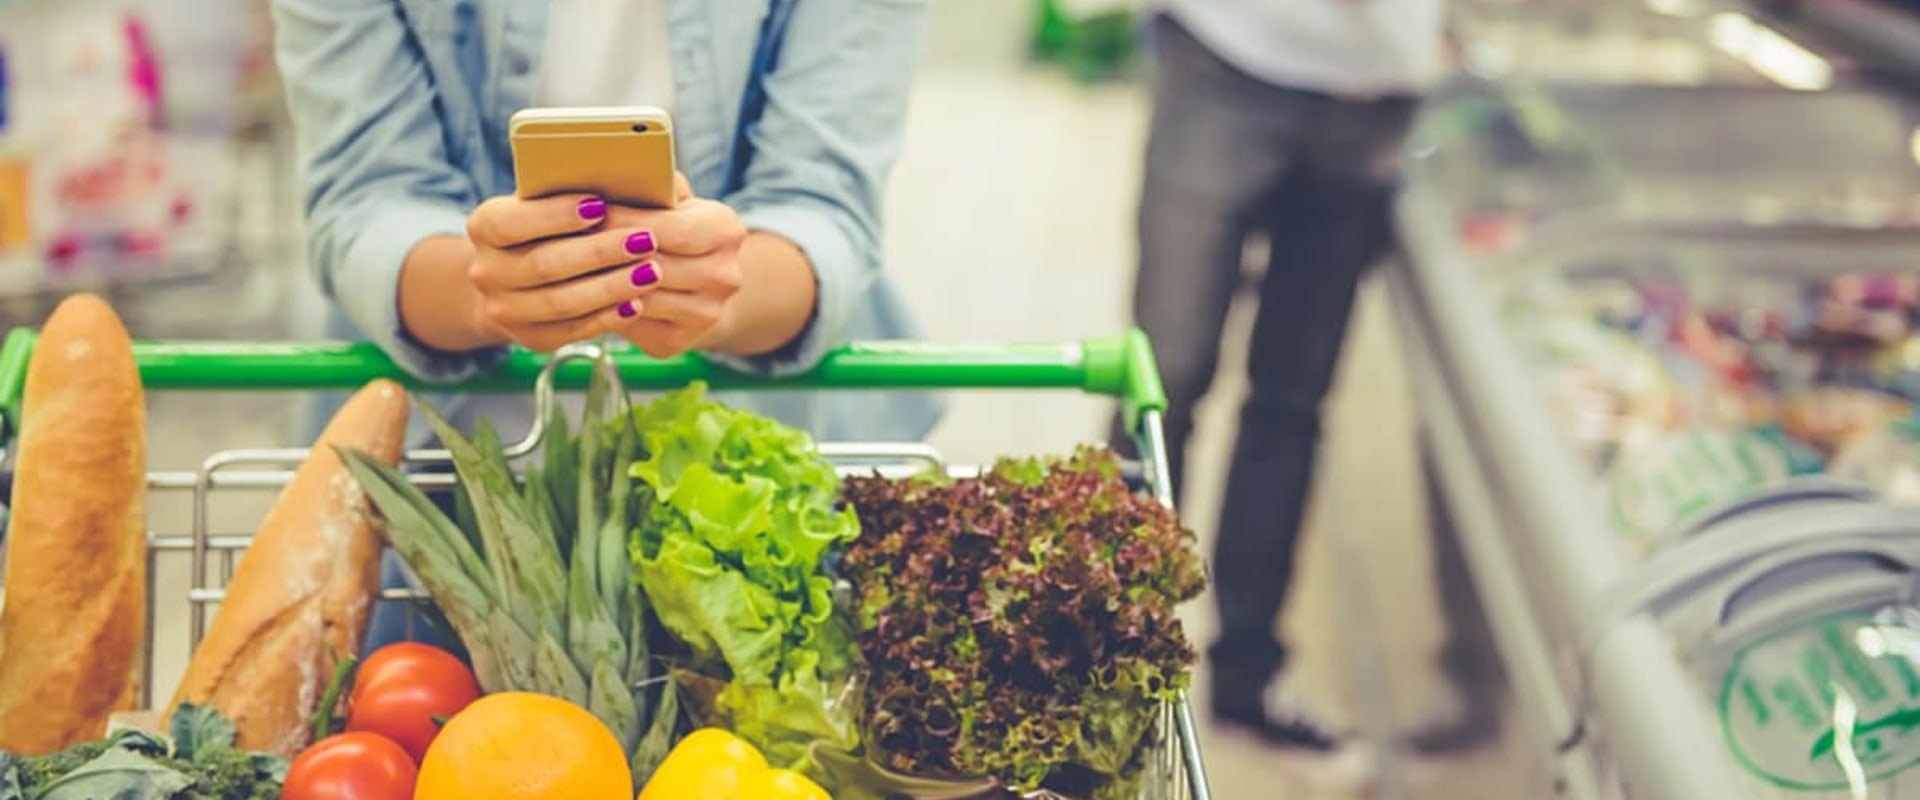 The Best Apps to Make Grocery Shopping Easier and More Efficient